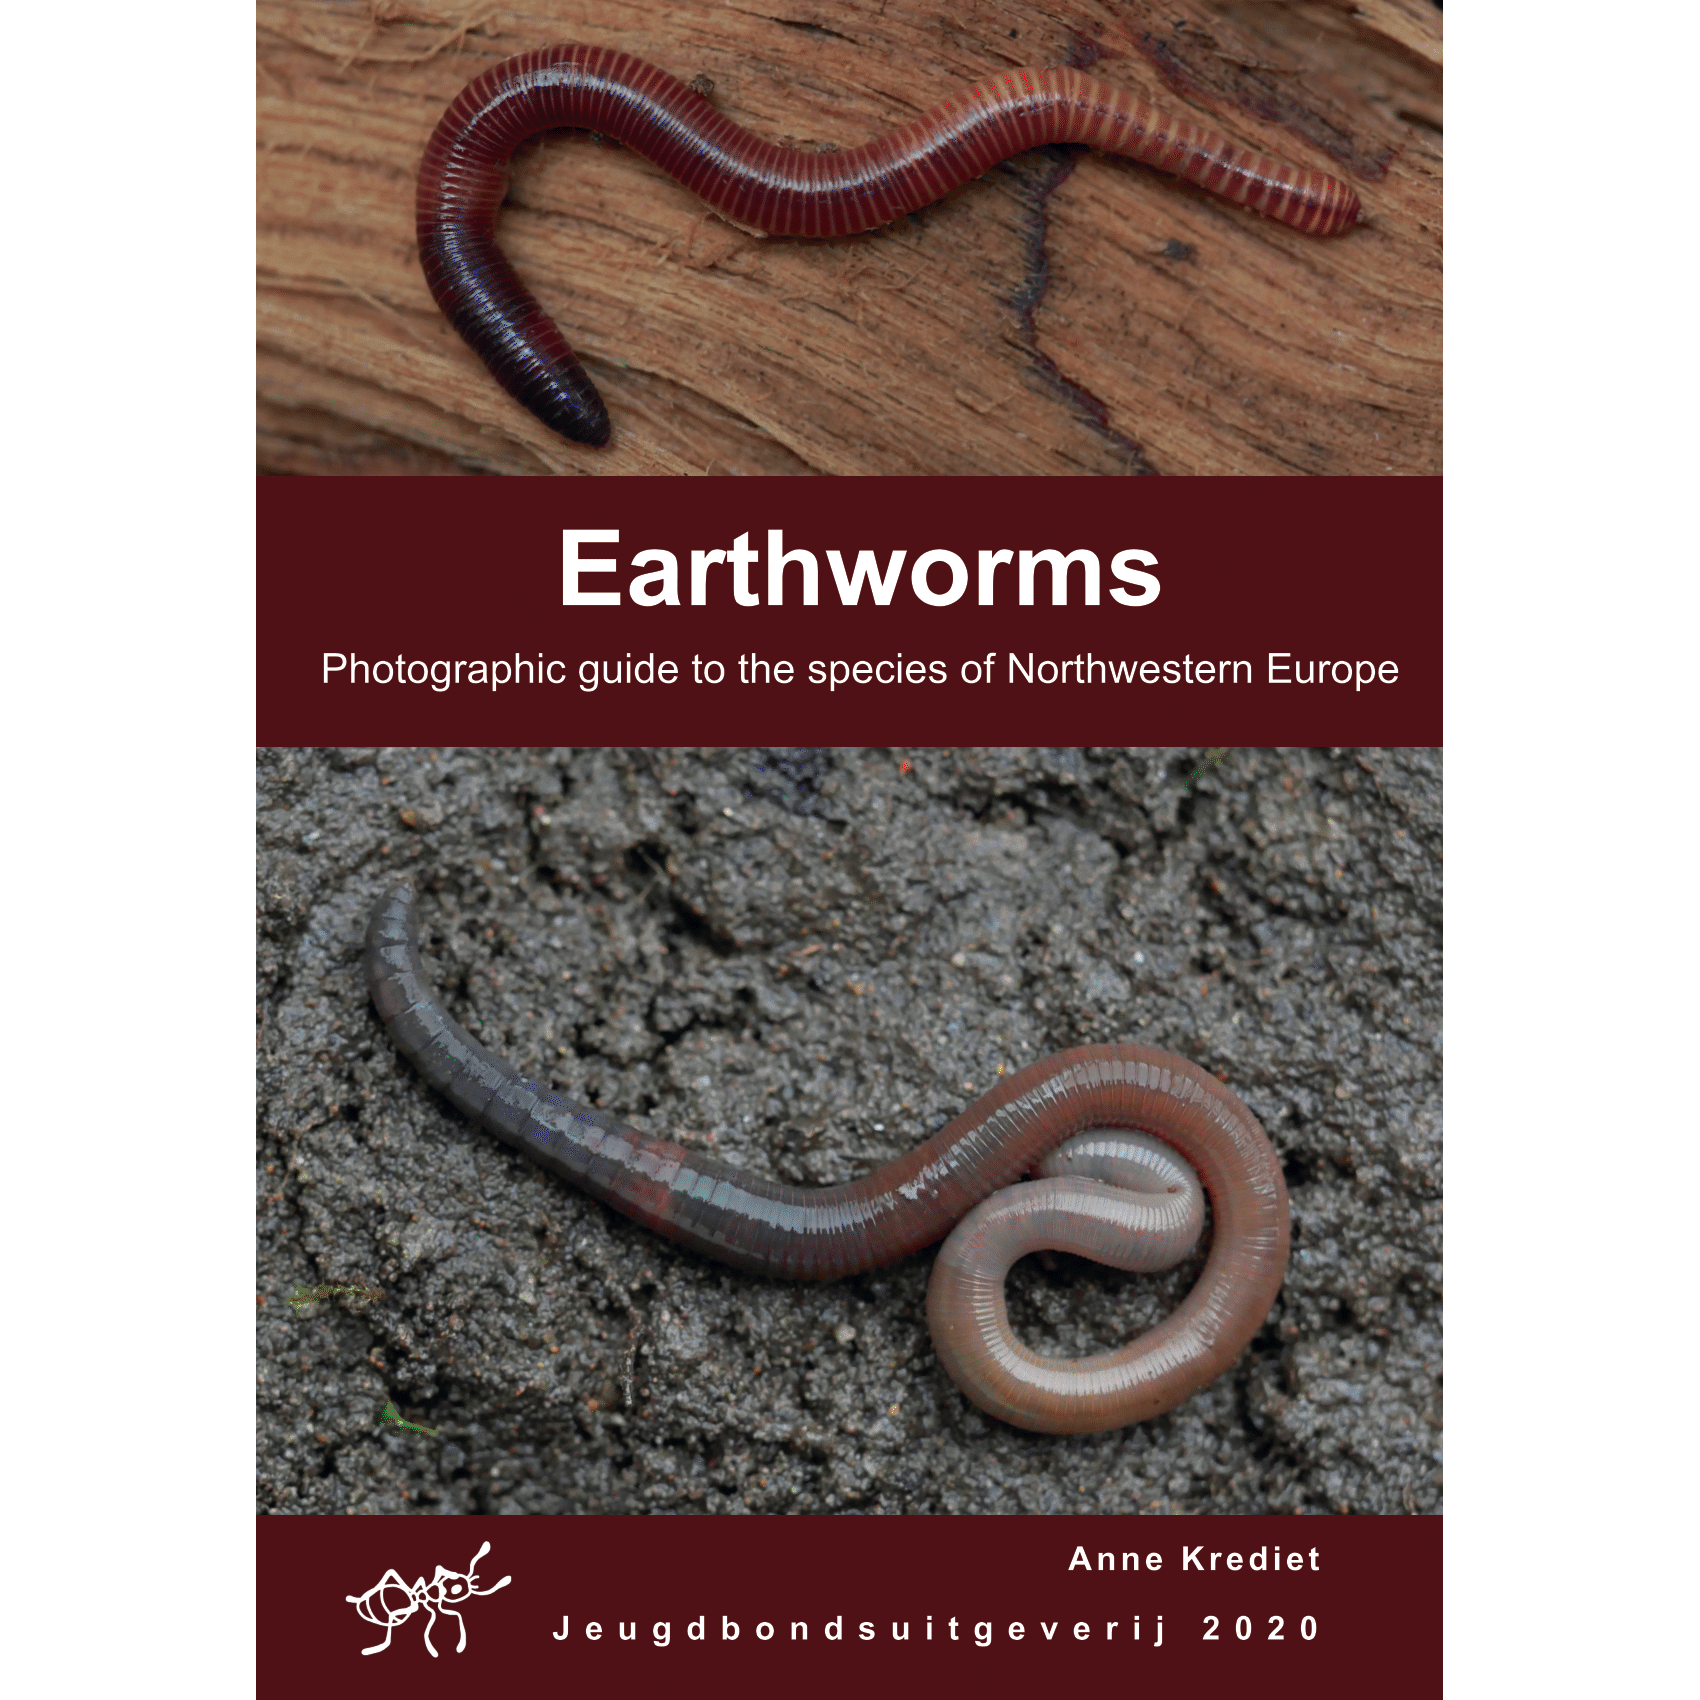 Earthworms: Photographic guide to the species of Northwestern